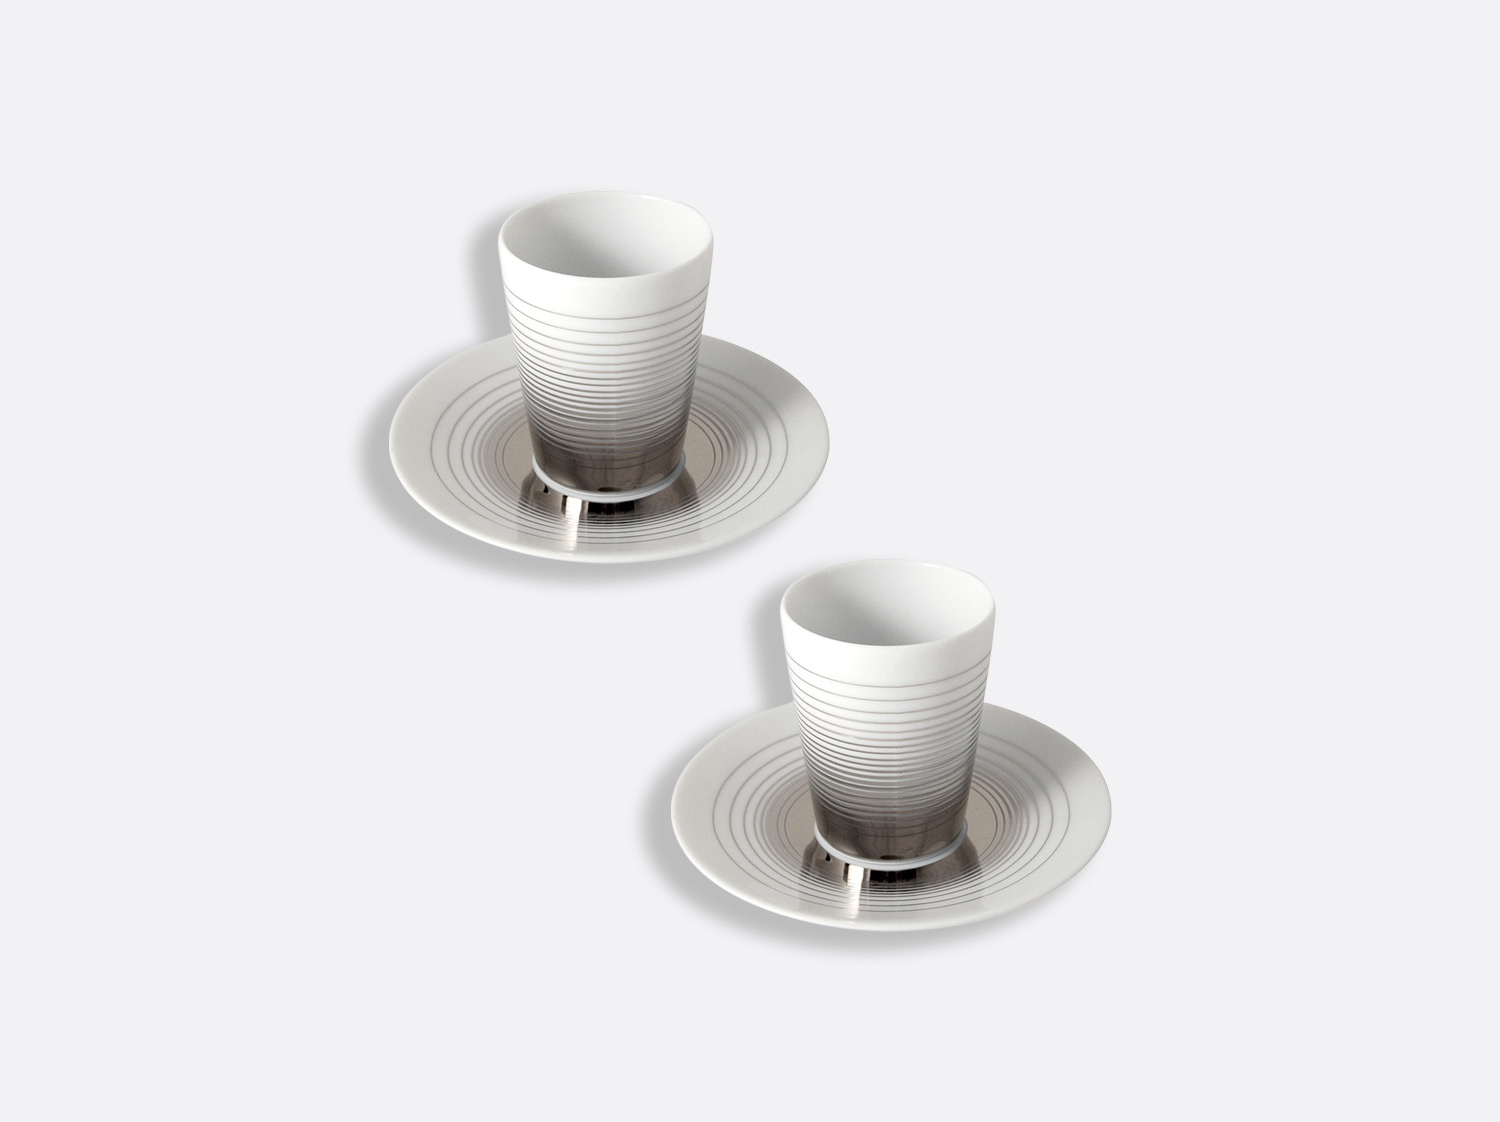 China Set of 2 handle-less coffee cups and saucers 7-cl of the collection Loop | Bernardaud